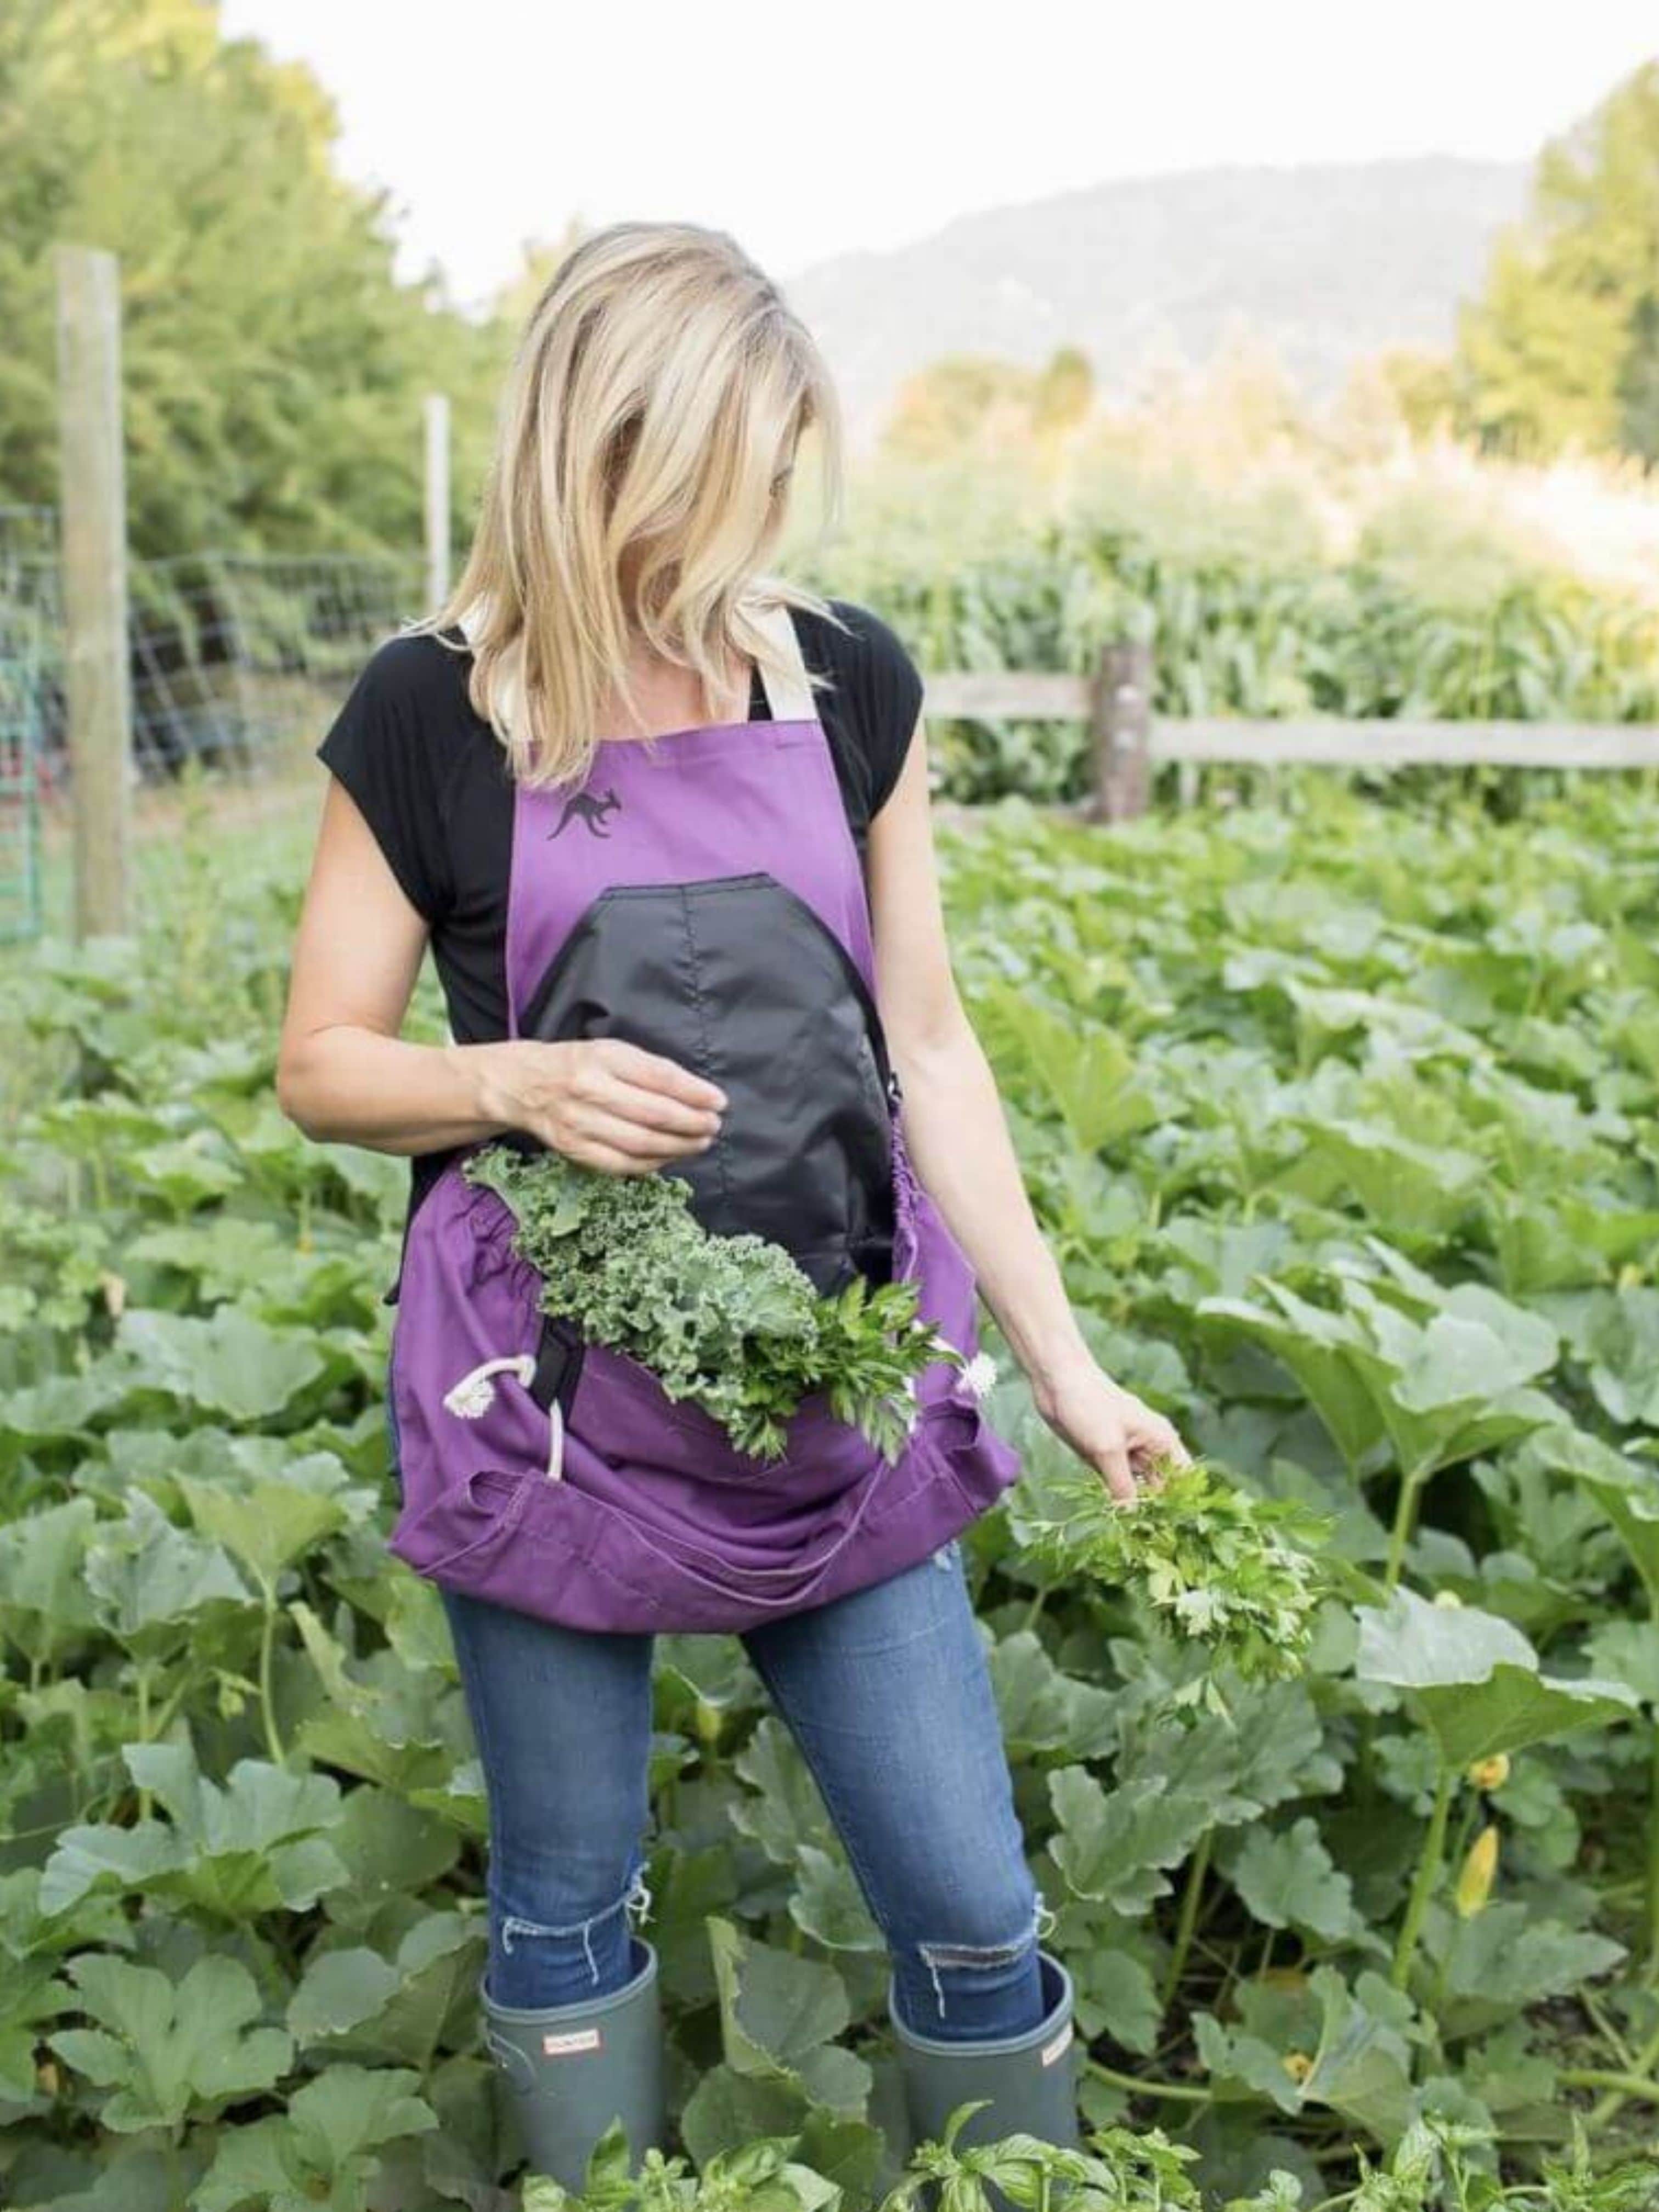 A blond woman models a purple roo apron in a field of squash plants